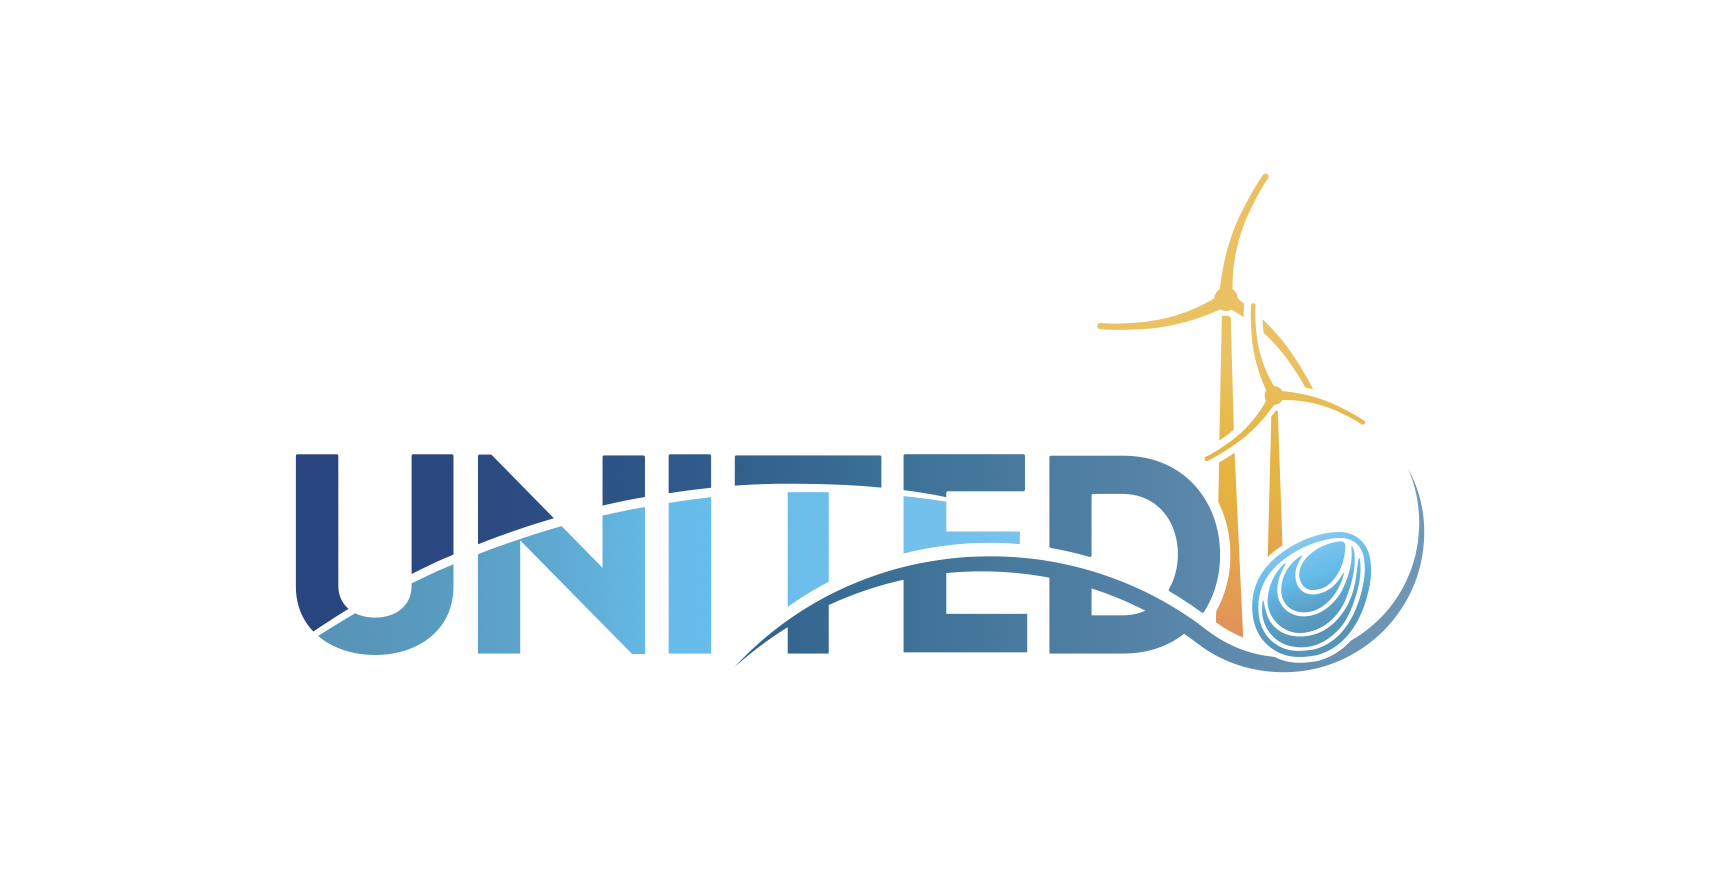 Belgian Pilot News | UNITED represented by the University of Ghent at the Fair “Speeding up Nature Positive offshore energy infrastructure deployment”